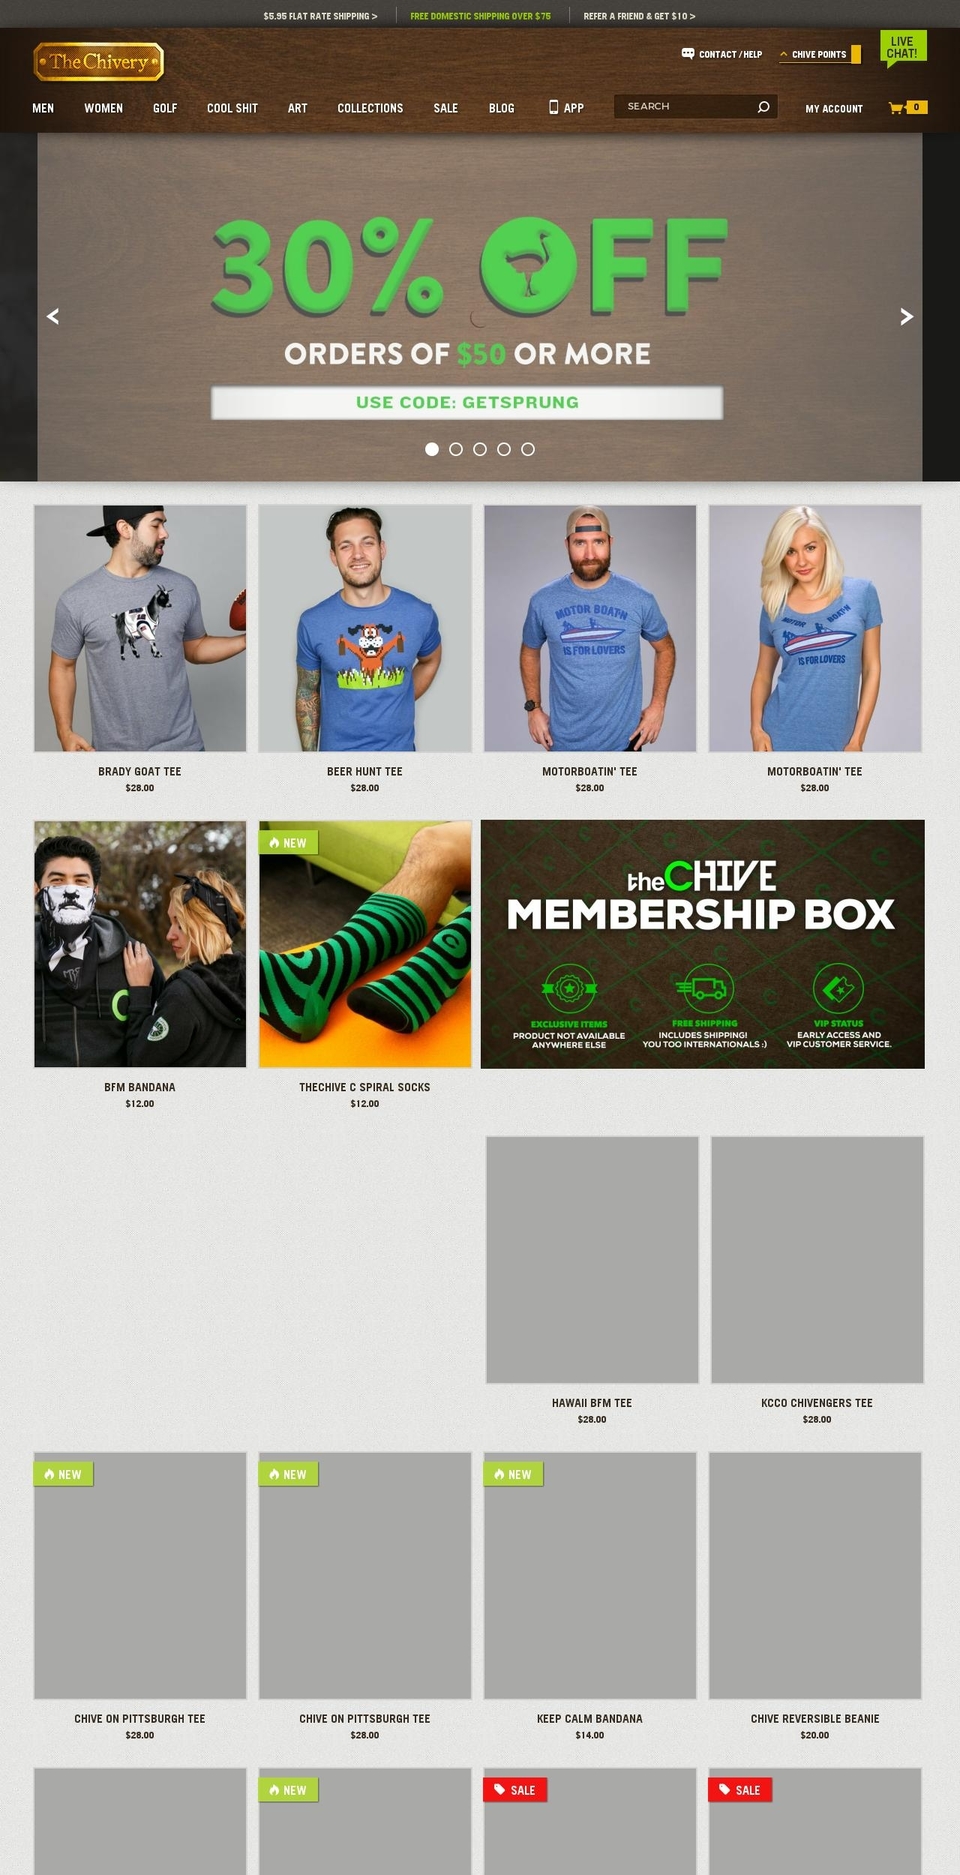 thechivery.com shopify website screenshot